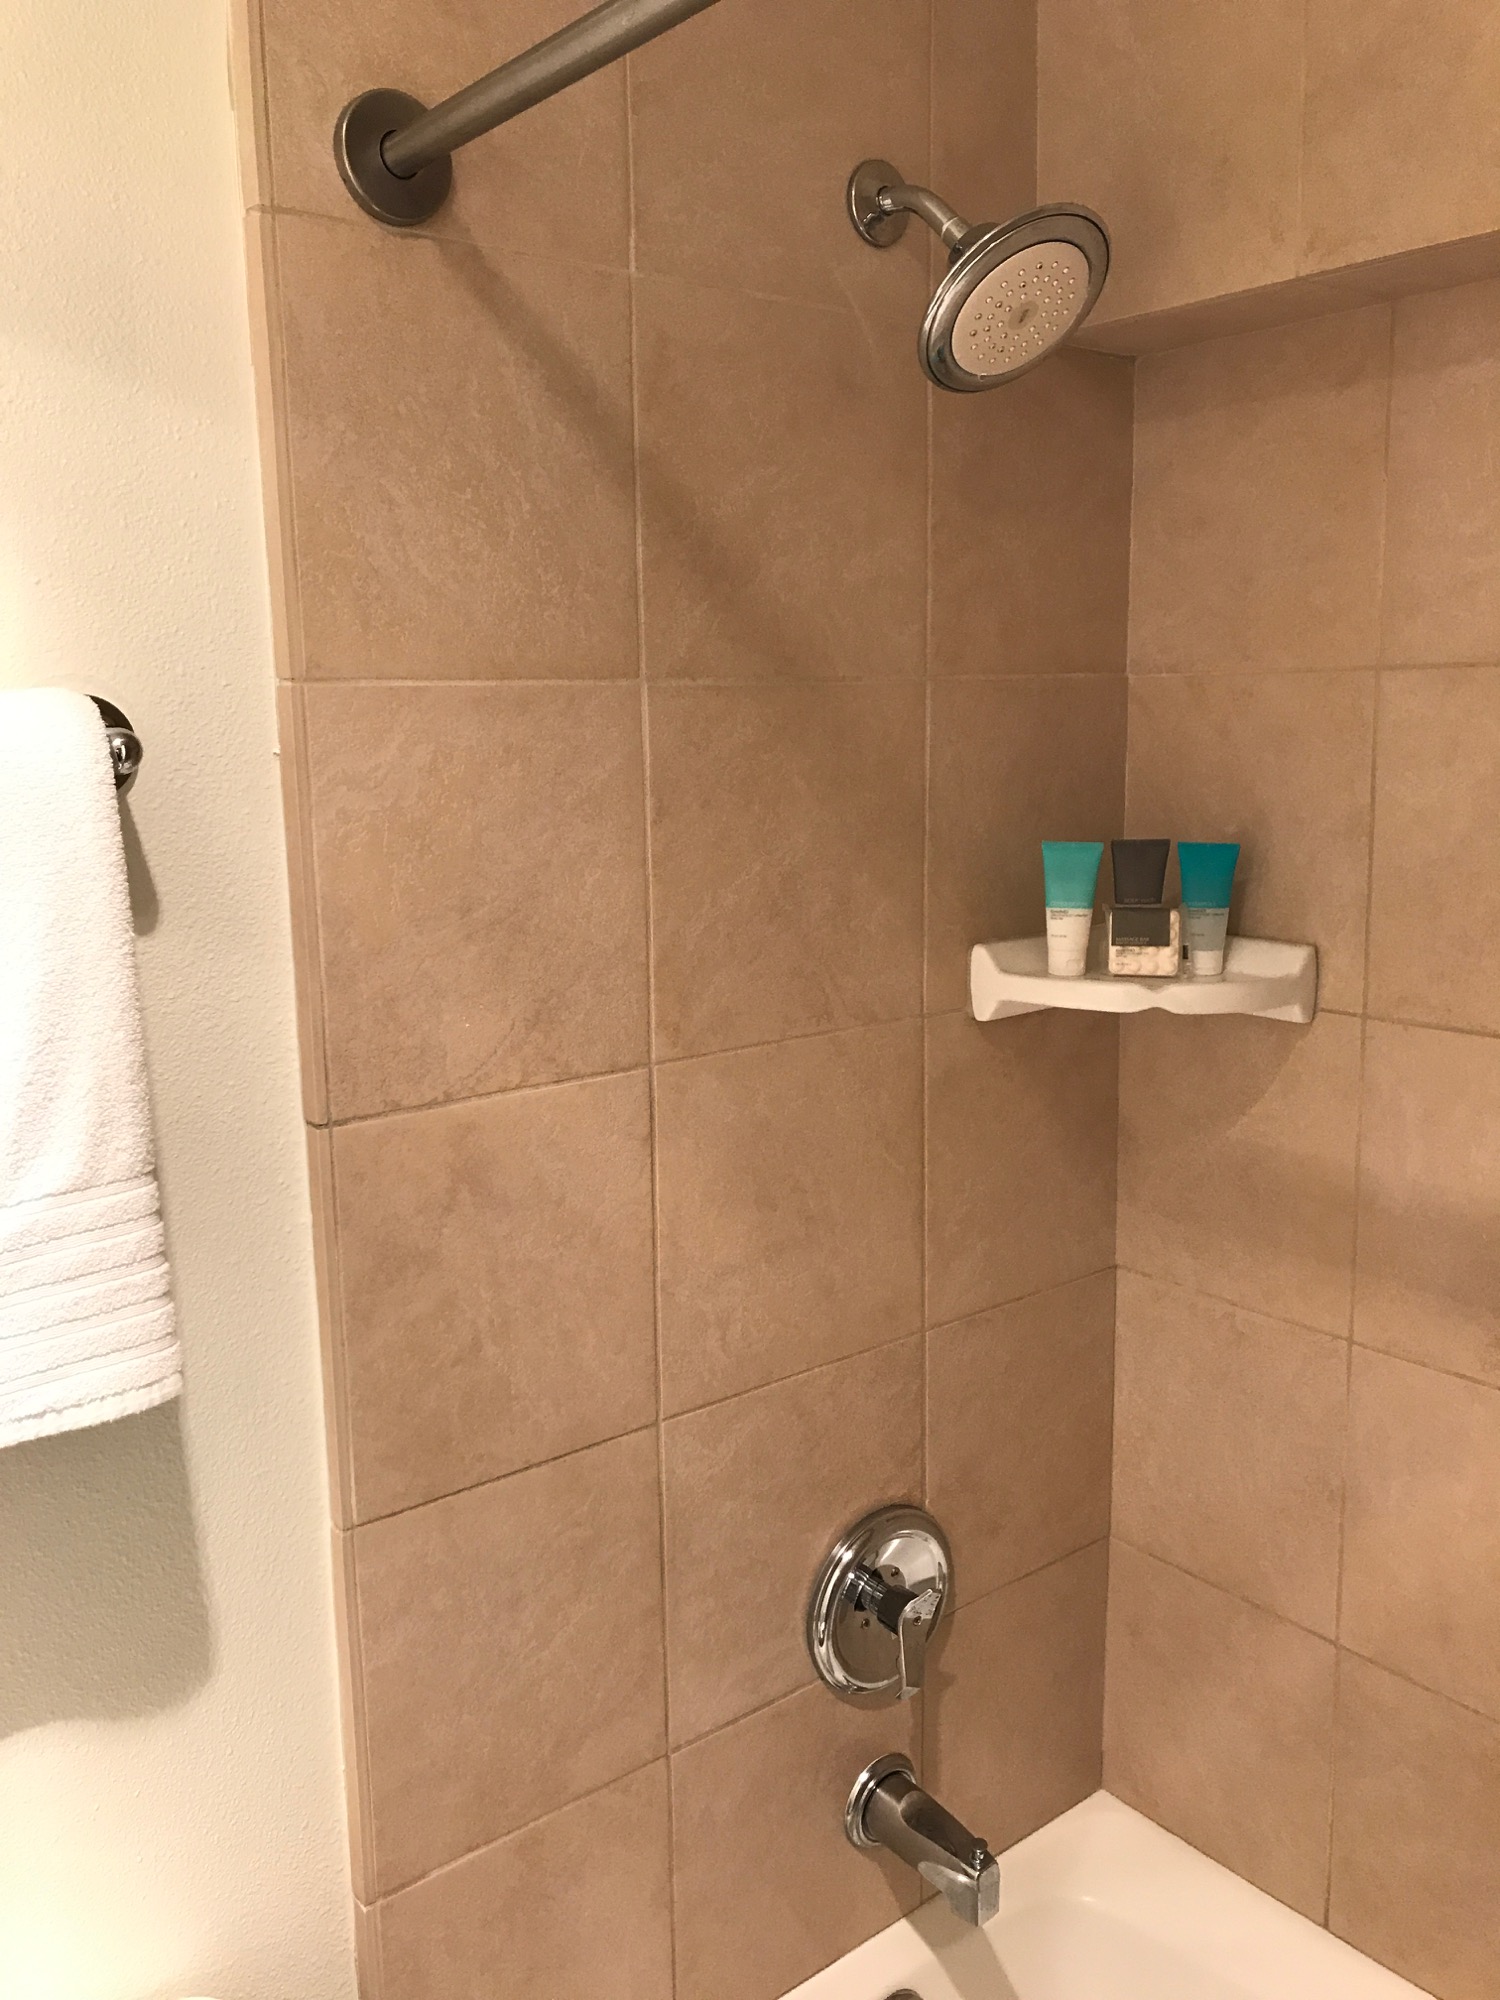 a shower with a shower head and a towel